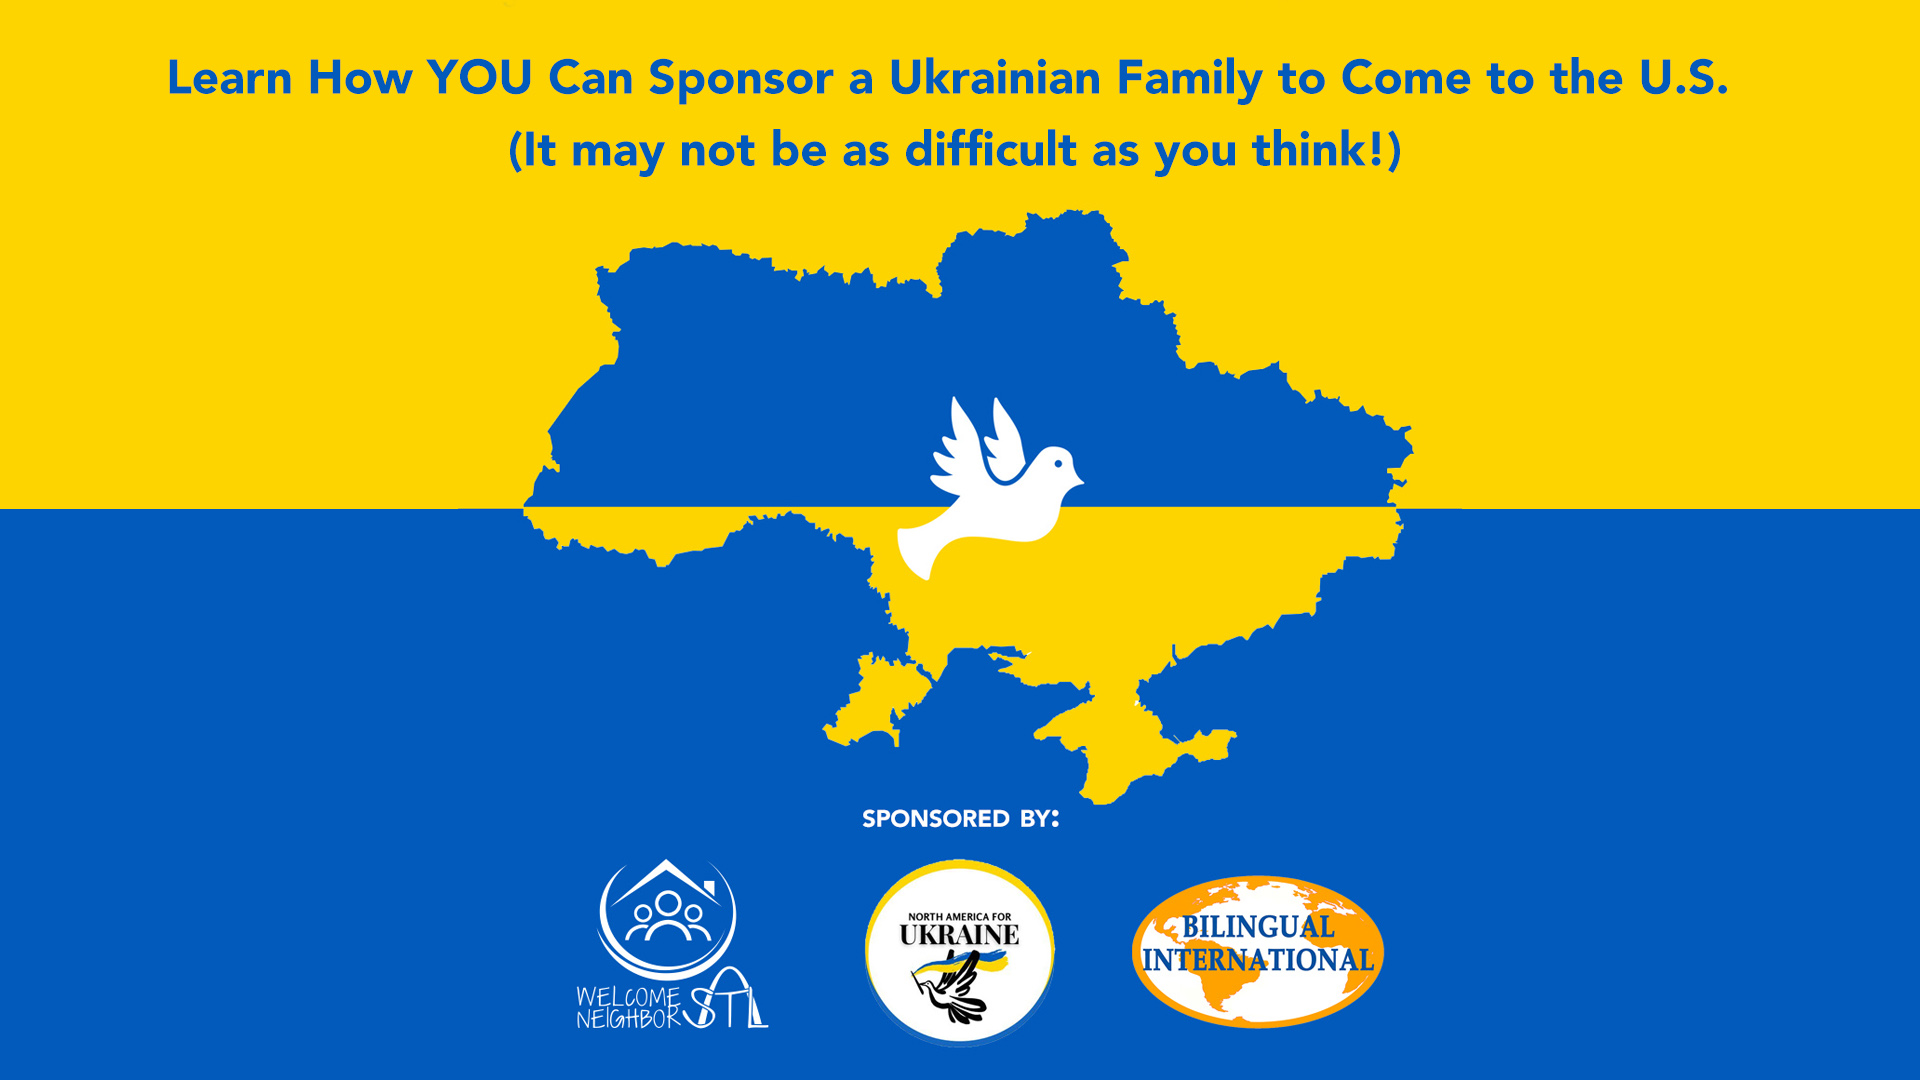 Learn How You Can Sponsor A Ukrainian Family To Come To The U.S.